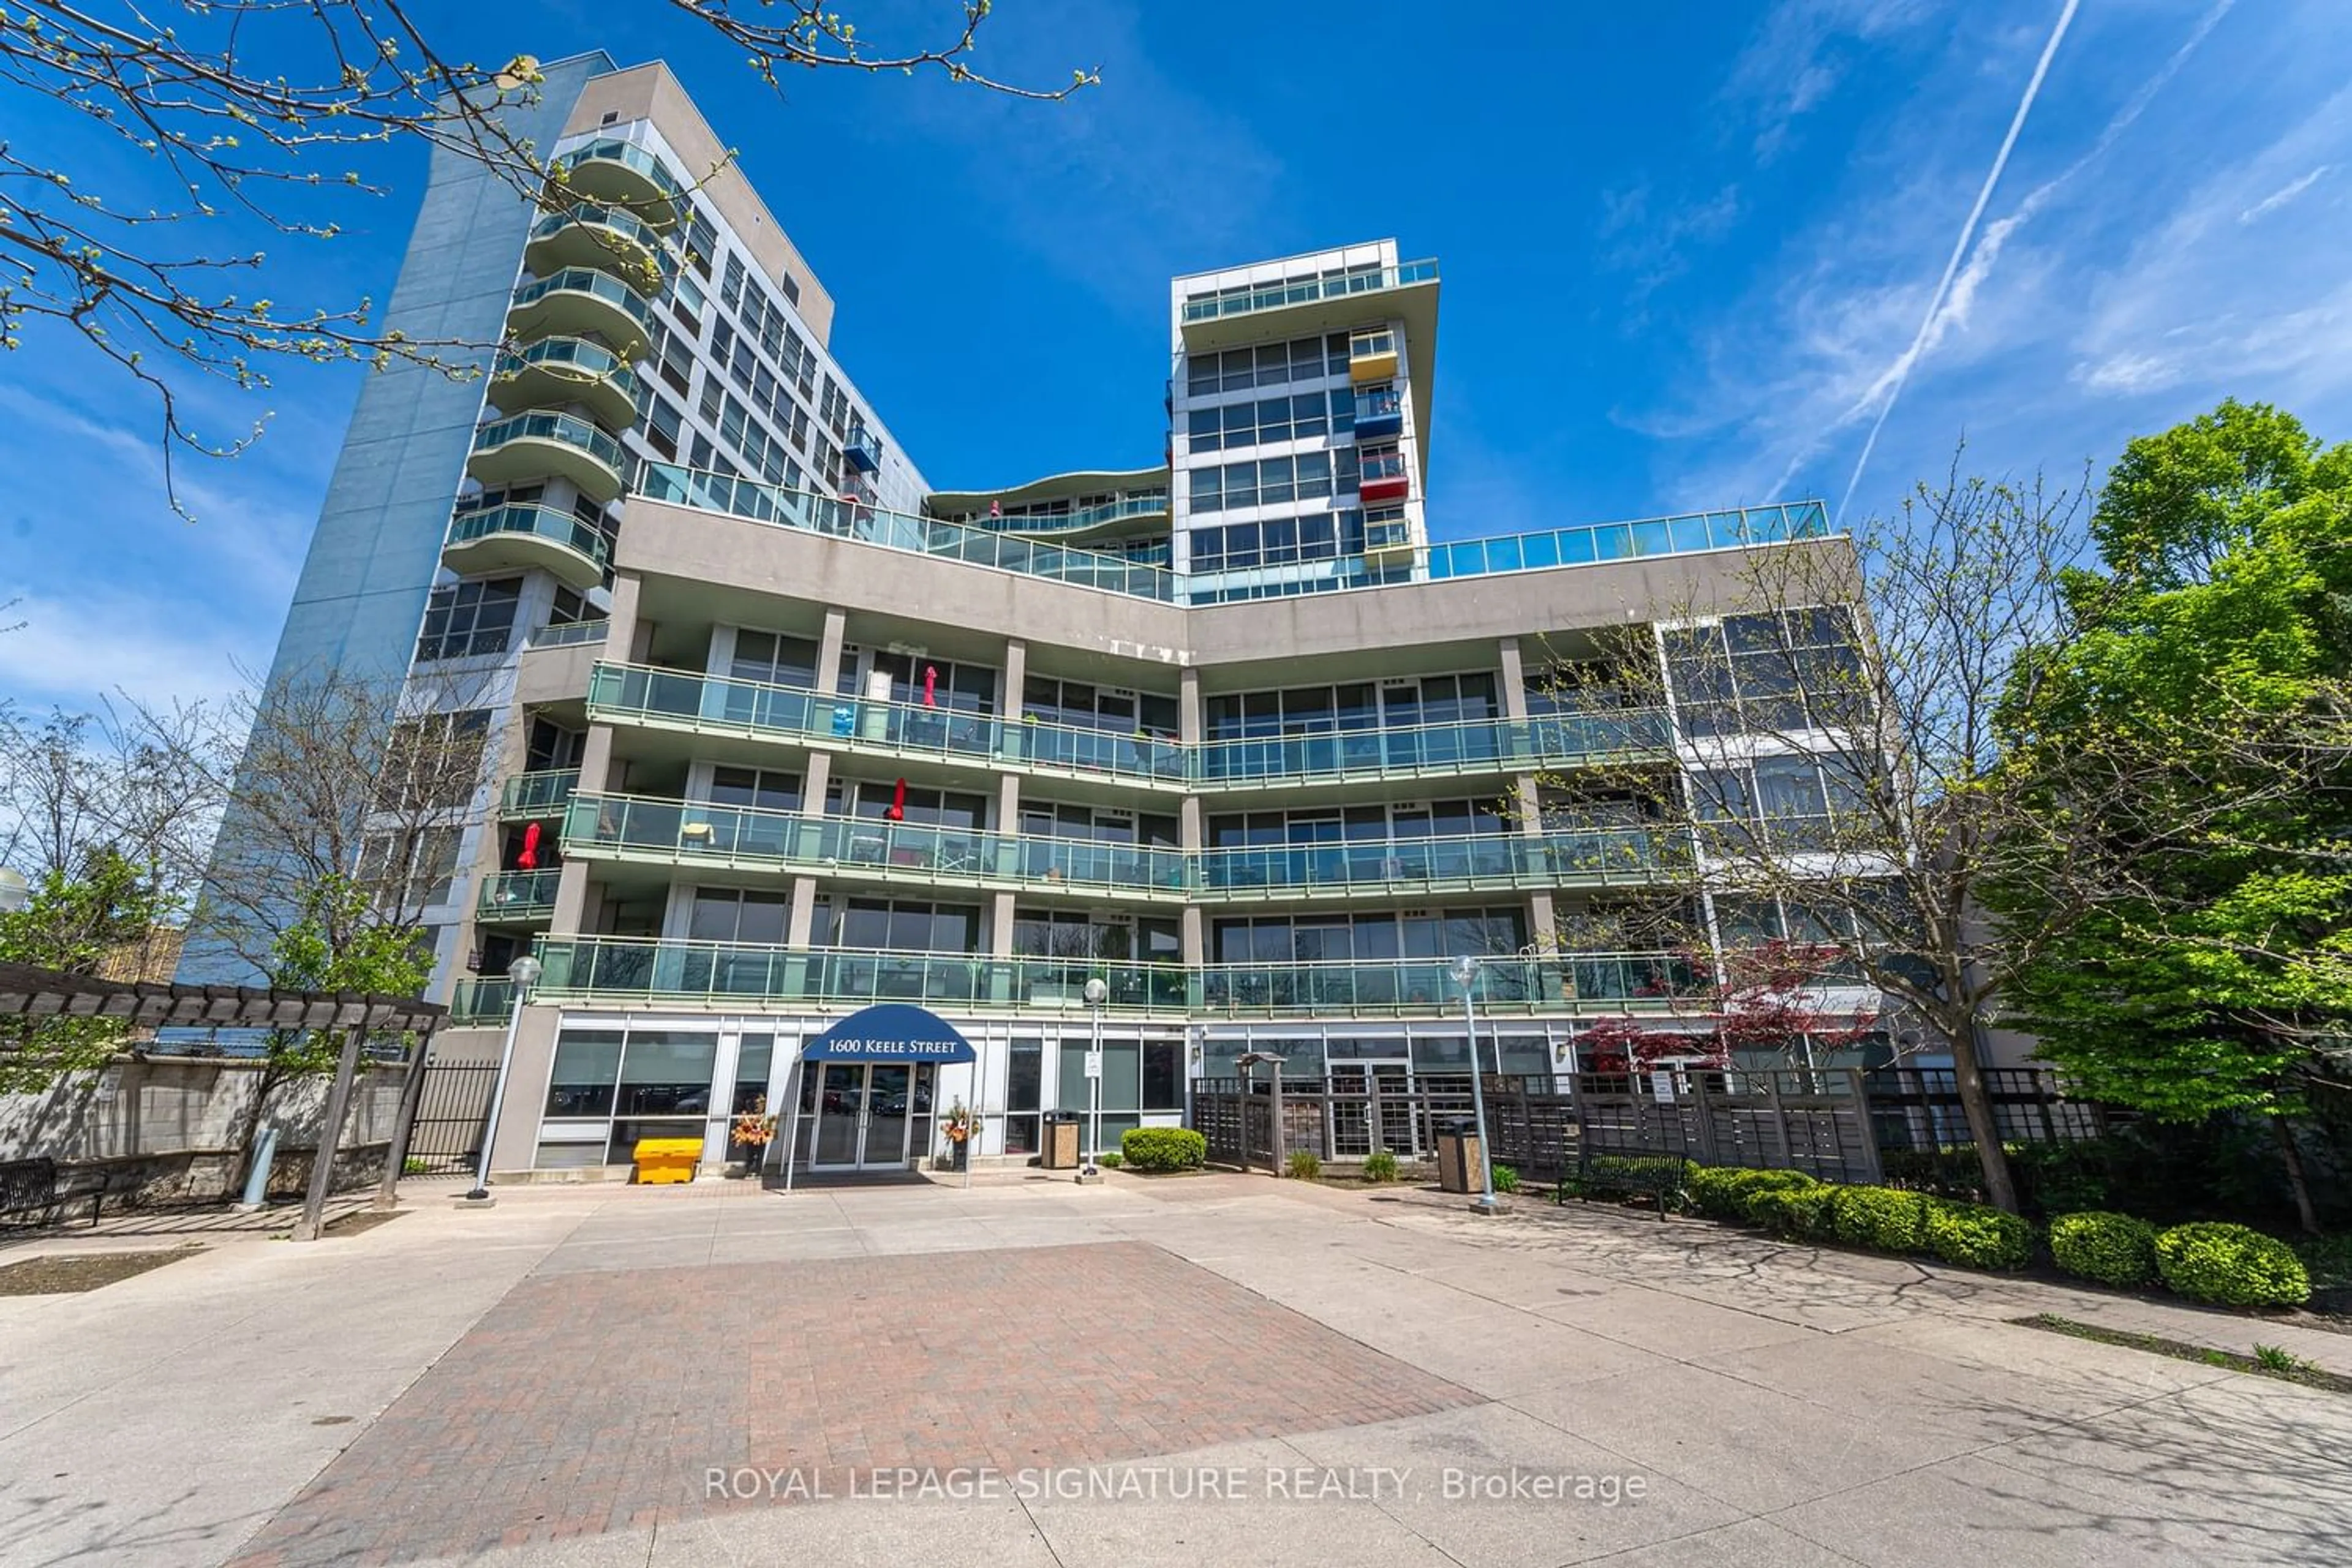 A pic from exterior of the house or condo for 1600 Keele St #201, Toronto Ontario M5H 5T5